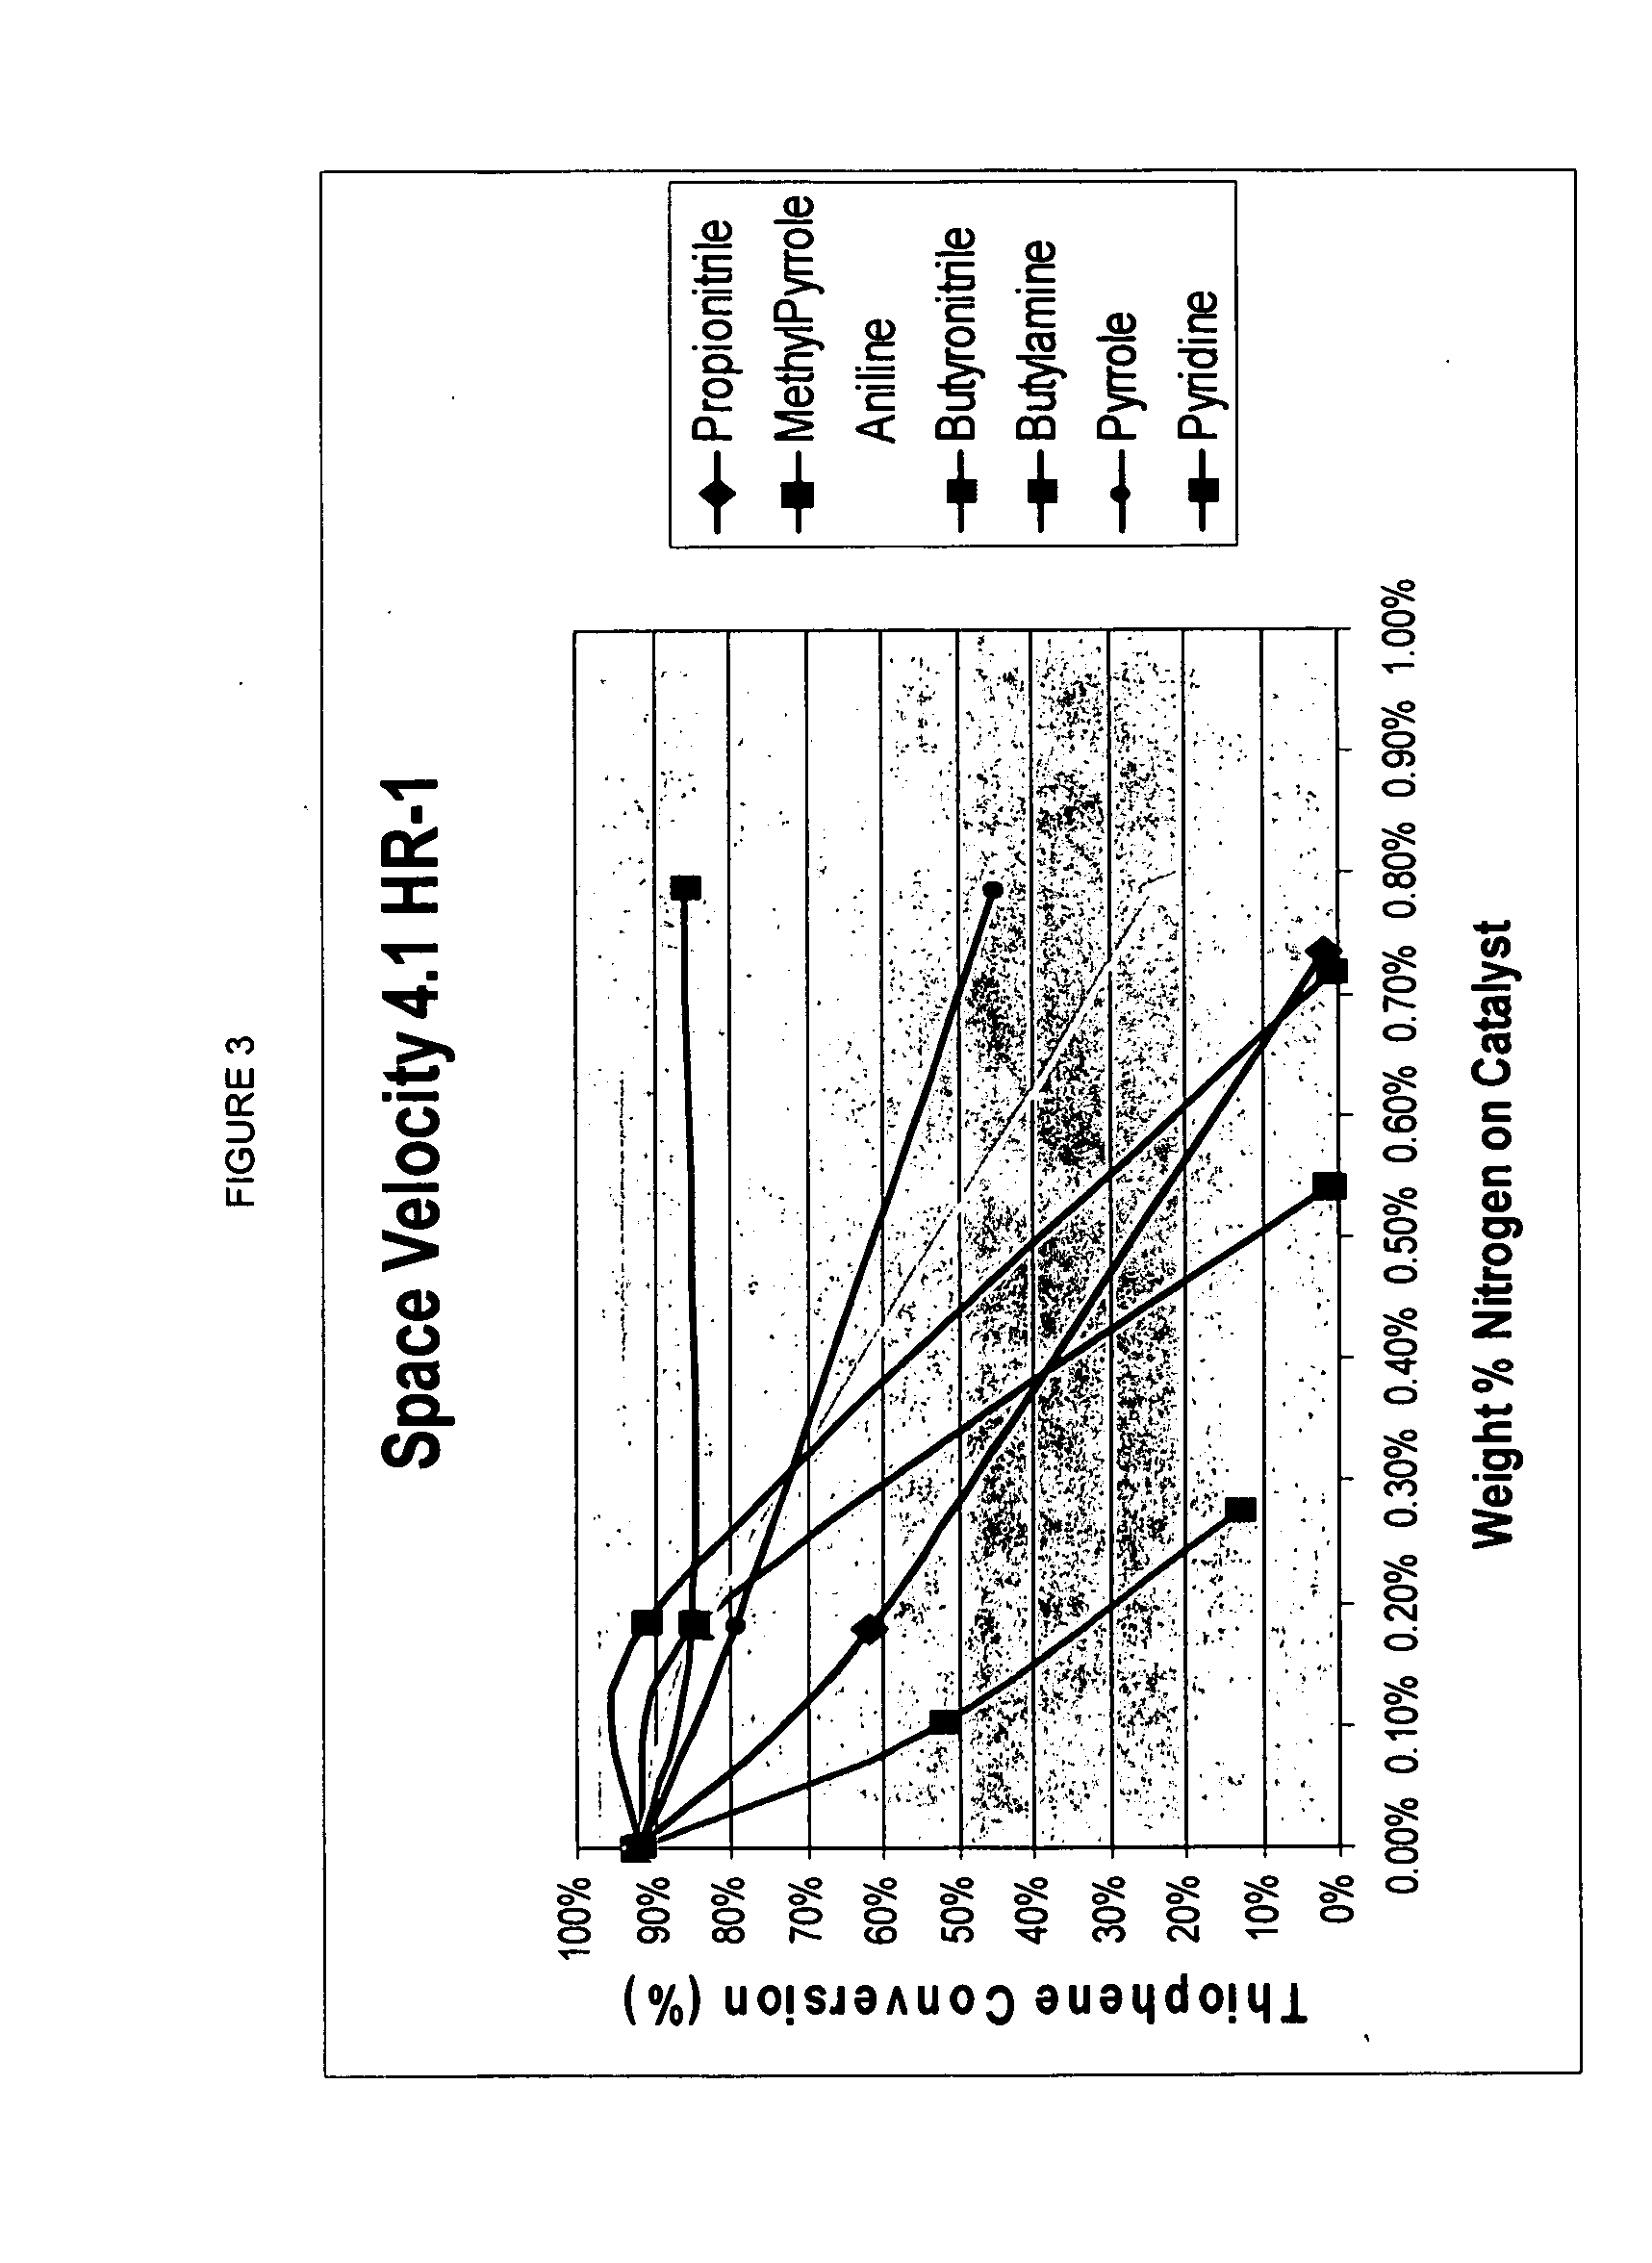 Process for removal of sulfur from components for blending of transportation fuels